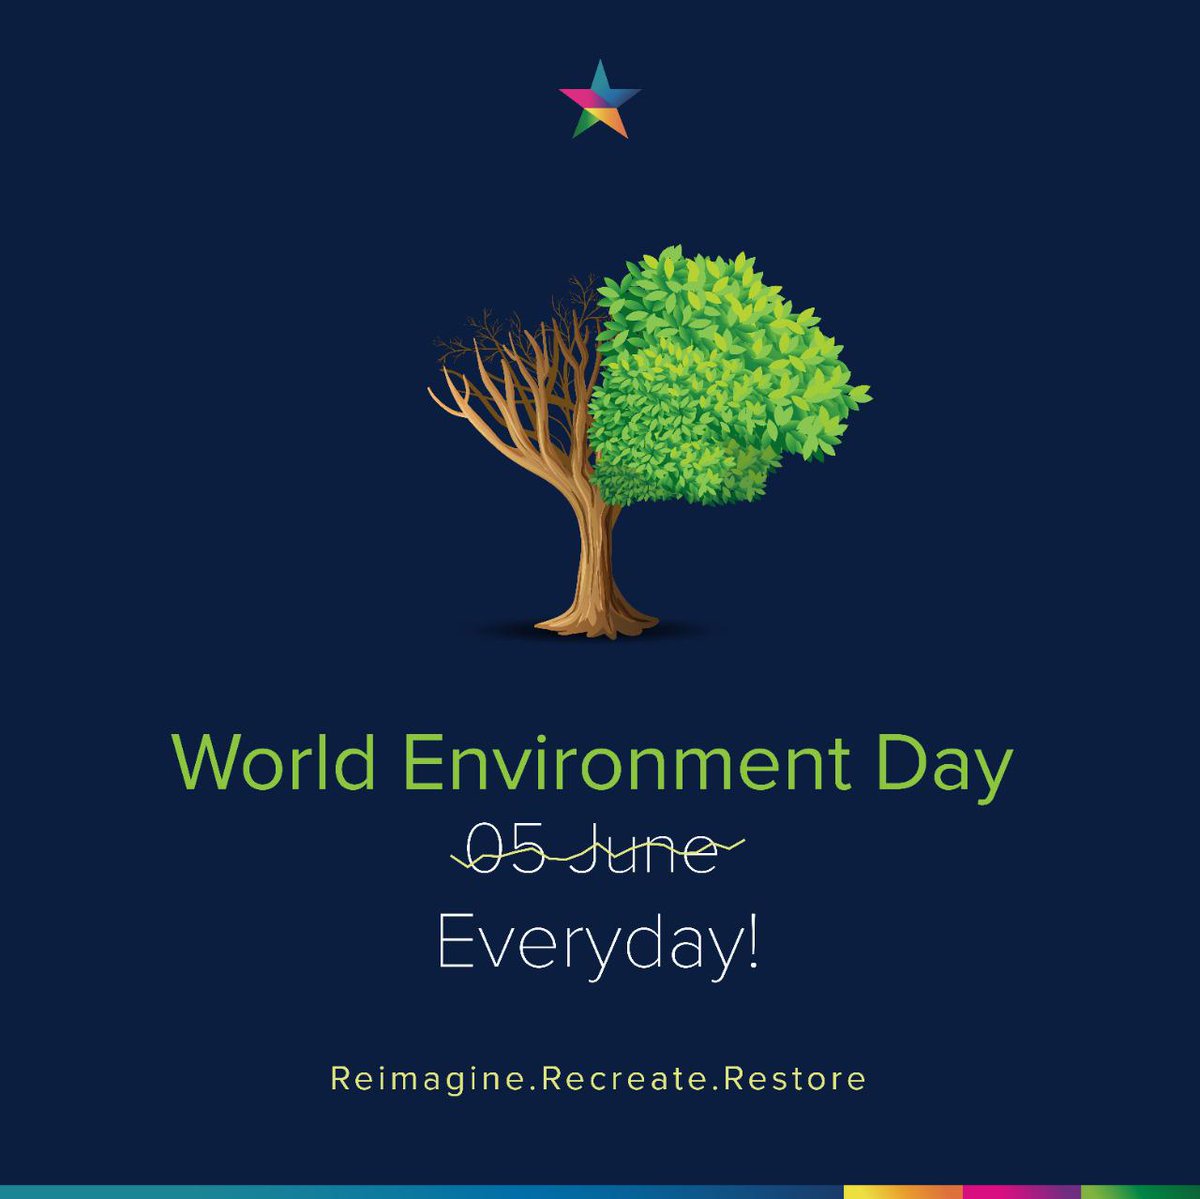 It’s time we replenish what we eat, drink and breathe. The truth is, we have just one Earth that we can never replace! #WorldEnvironmentDay2021 #MoreGreen #earth #nature #conservation #sustainable #protectingearth #environment #savetrees #savewater #saveanimals #EcoFriendly